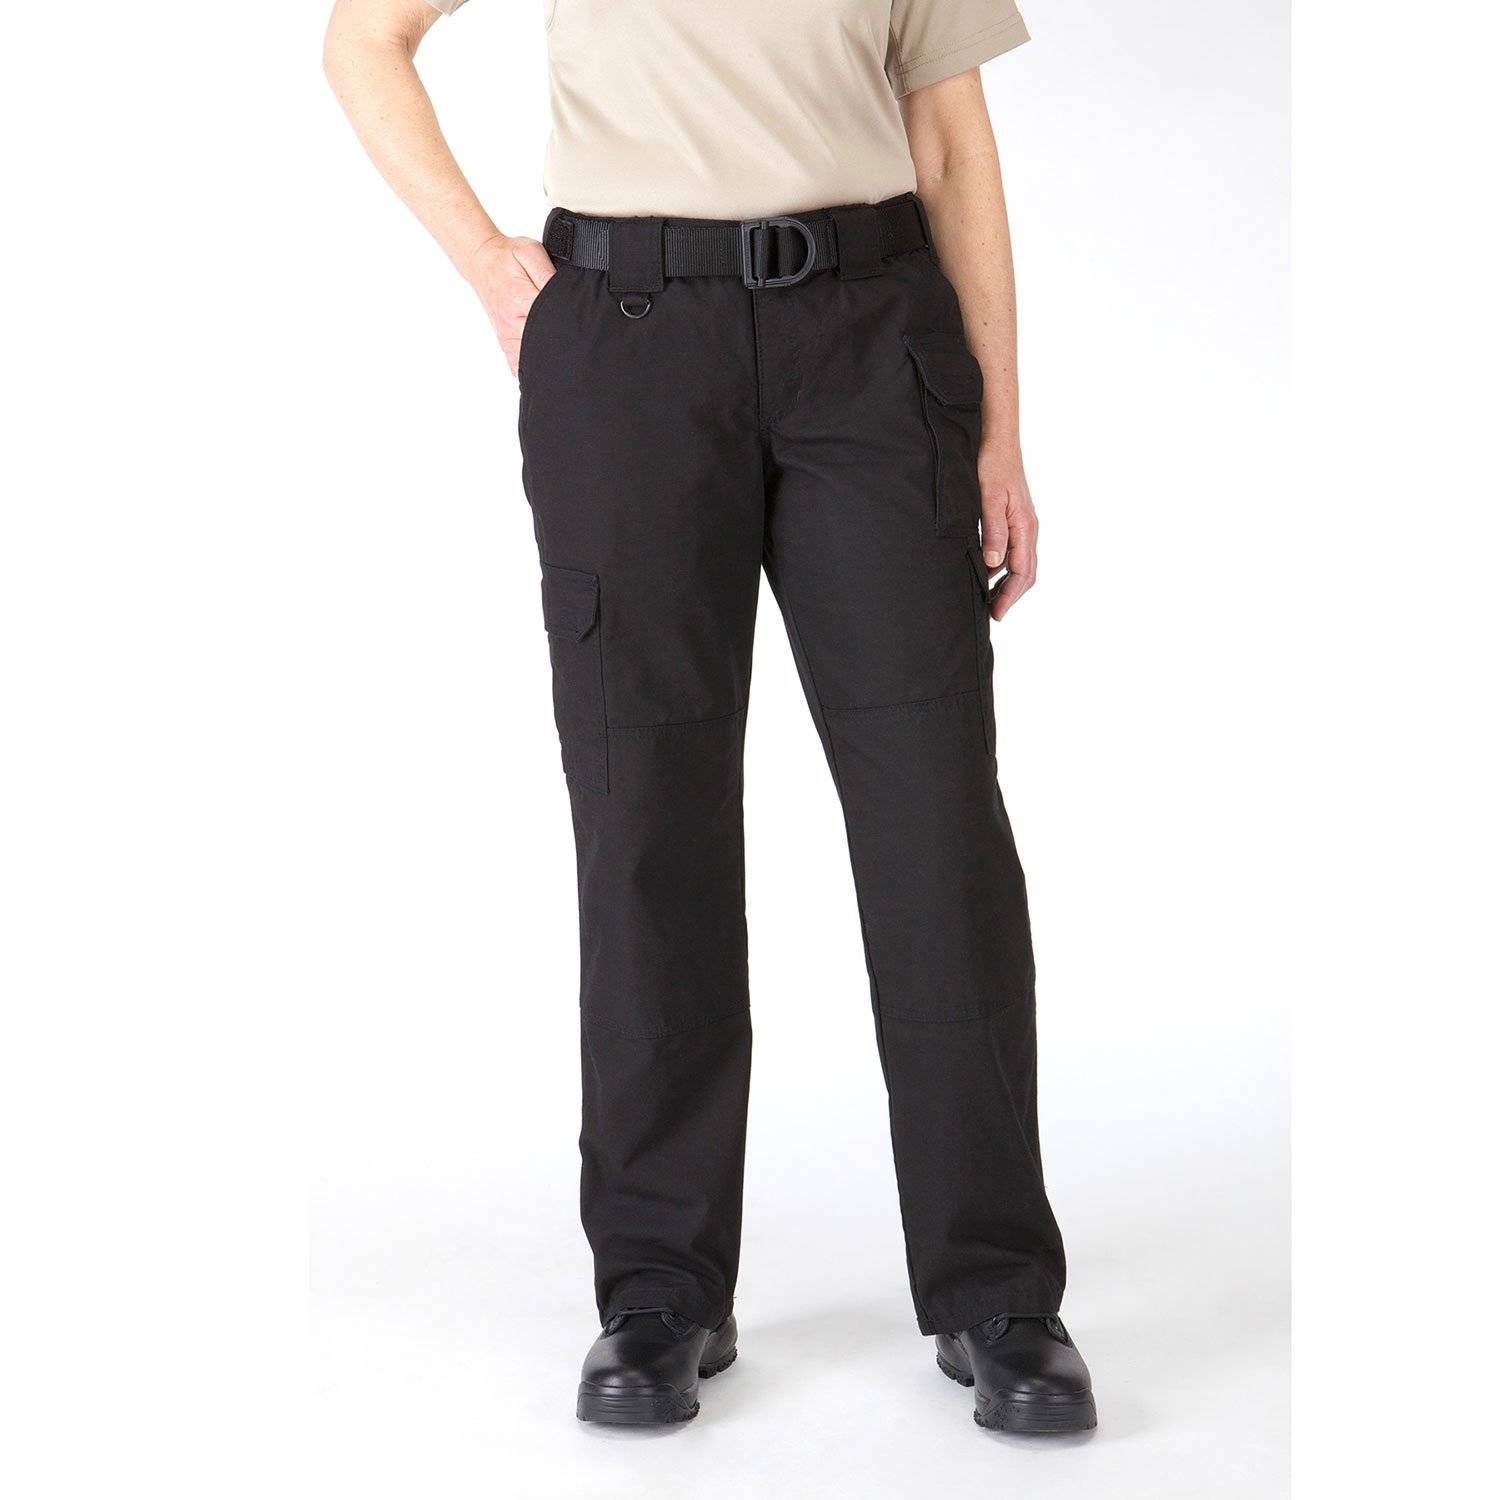 Athletic Works, Pants & Jumpsuits, Nwt Athletic Works Womens Fleece Pants  With Pockets Size Xl 618